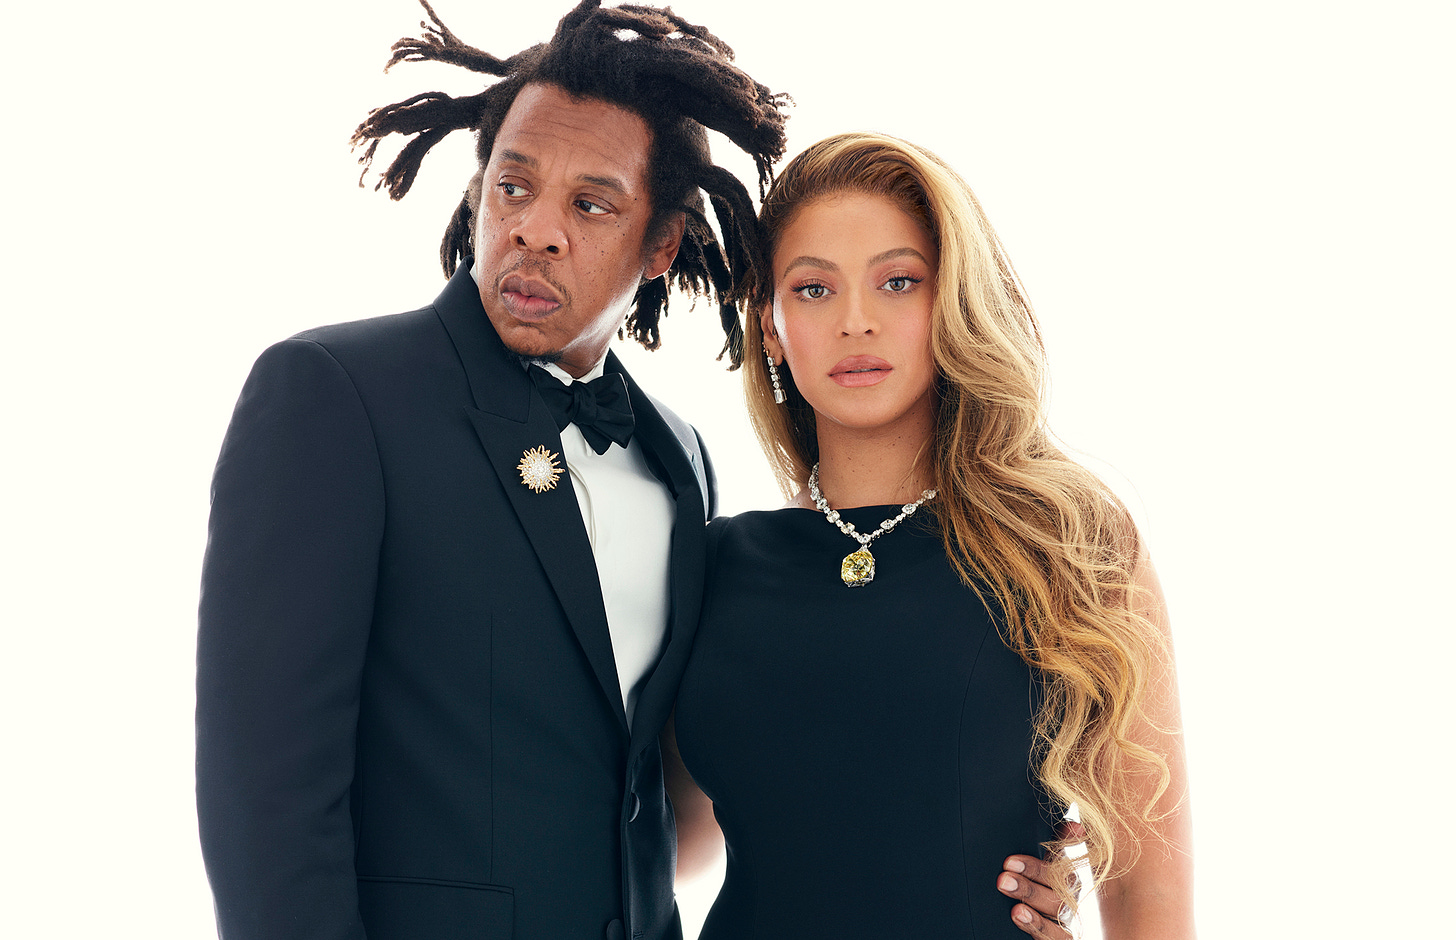 Beyonce Sparkles in New Tiffany & Co Promo with JAY-Z - That Grape Juice